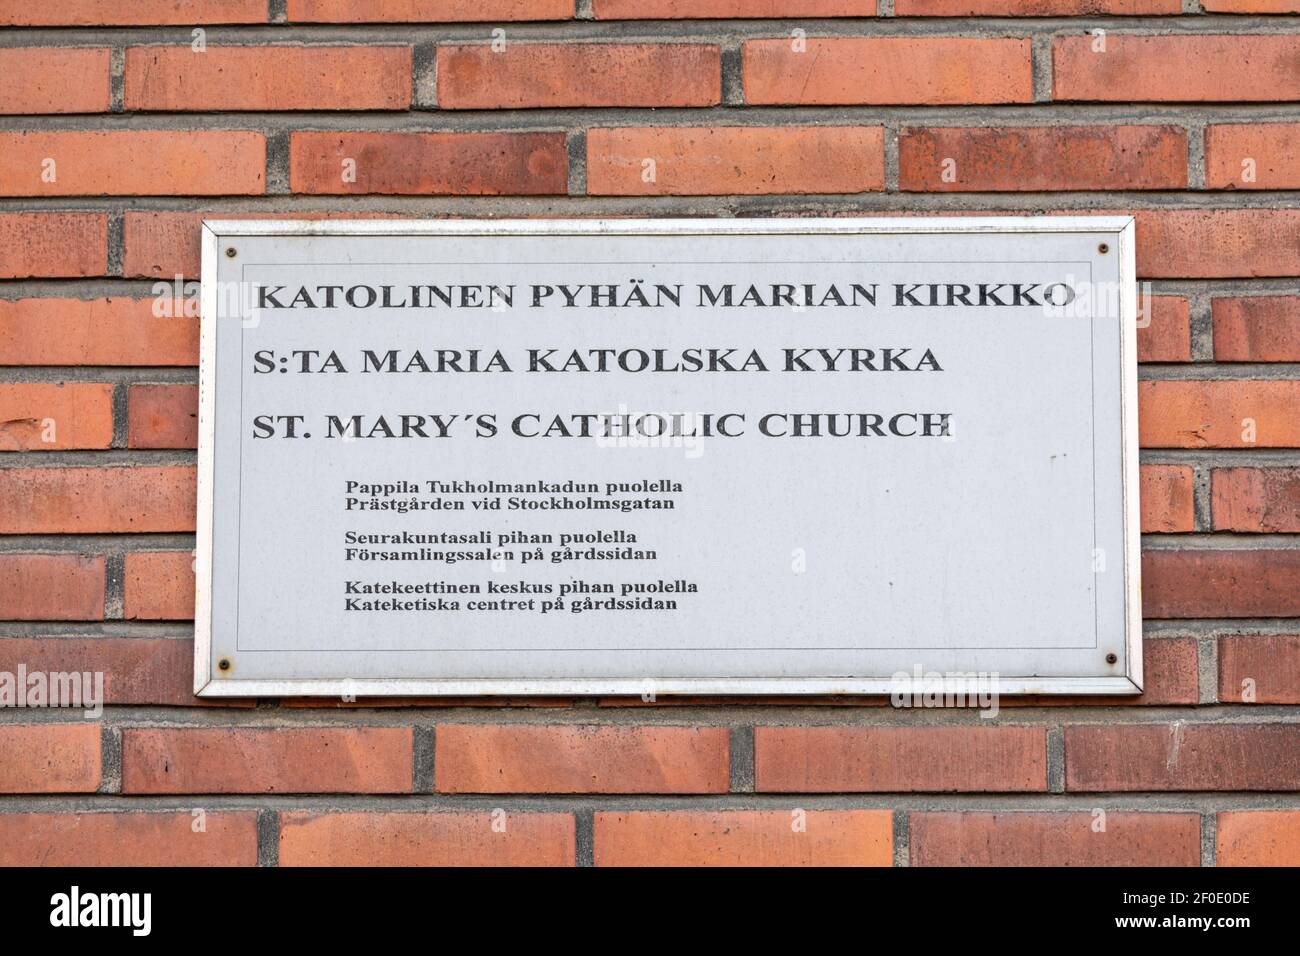 St. Mary's Catholic Church sign on brick wall in Meilahti district of Helsinki, Finland Stock Photo